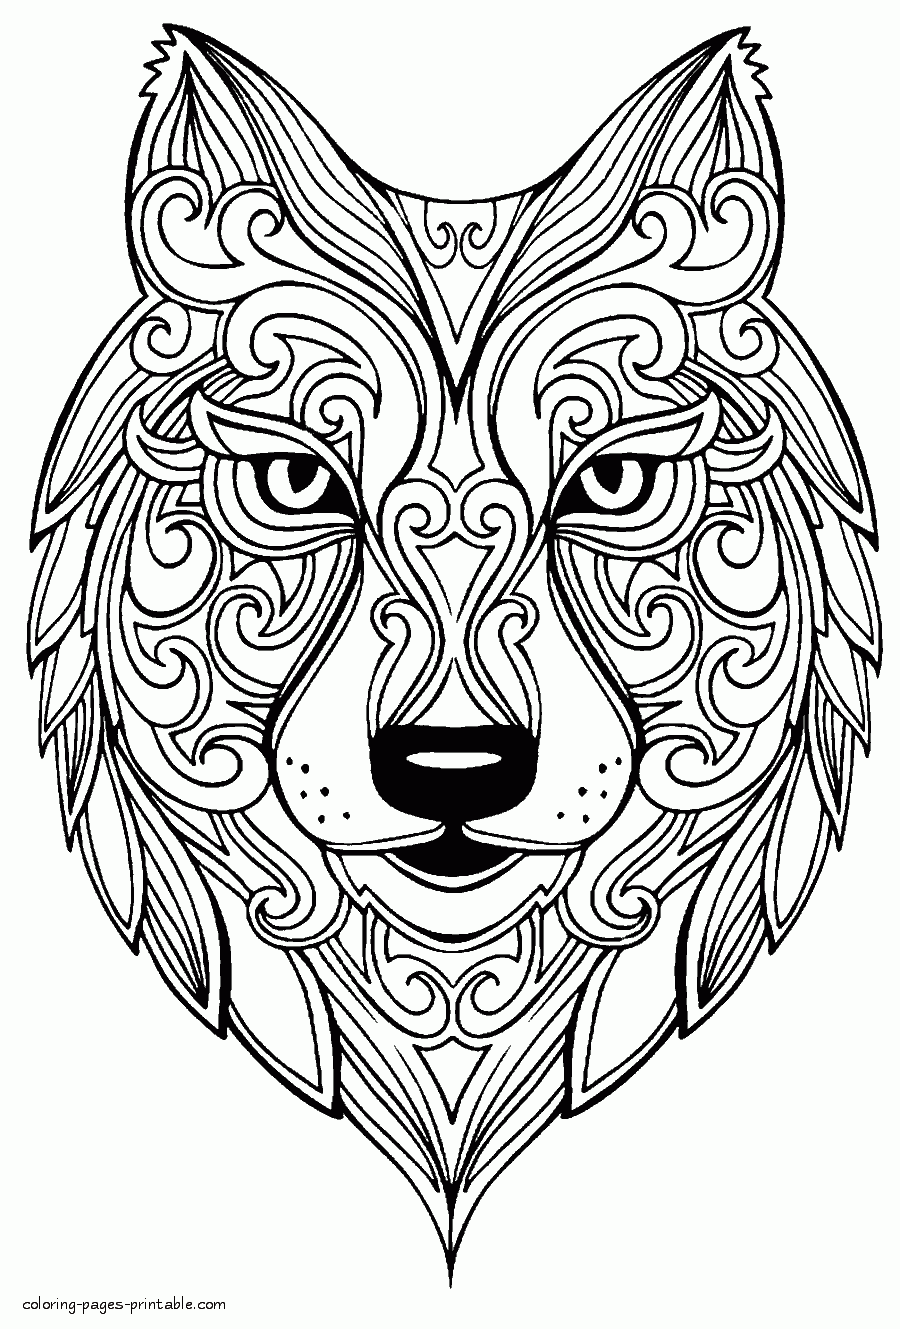 Animal Printable Coloring Pictures For Adults    COLORING PAGES ...